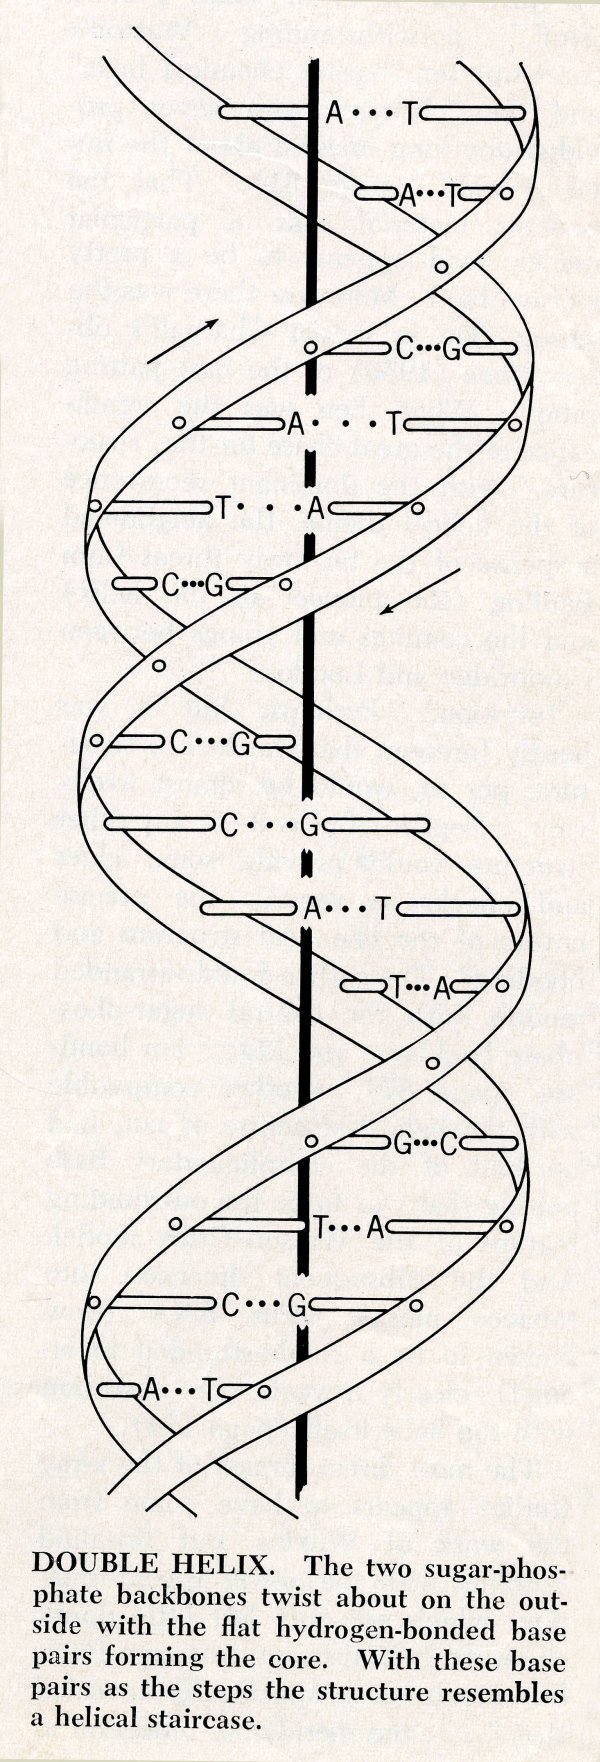 Diagram of the double-helix structure of DNA.